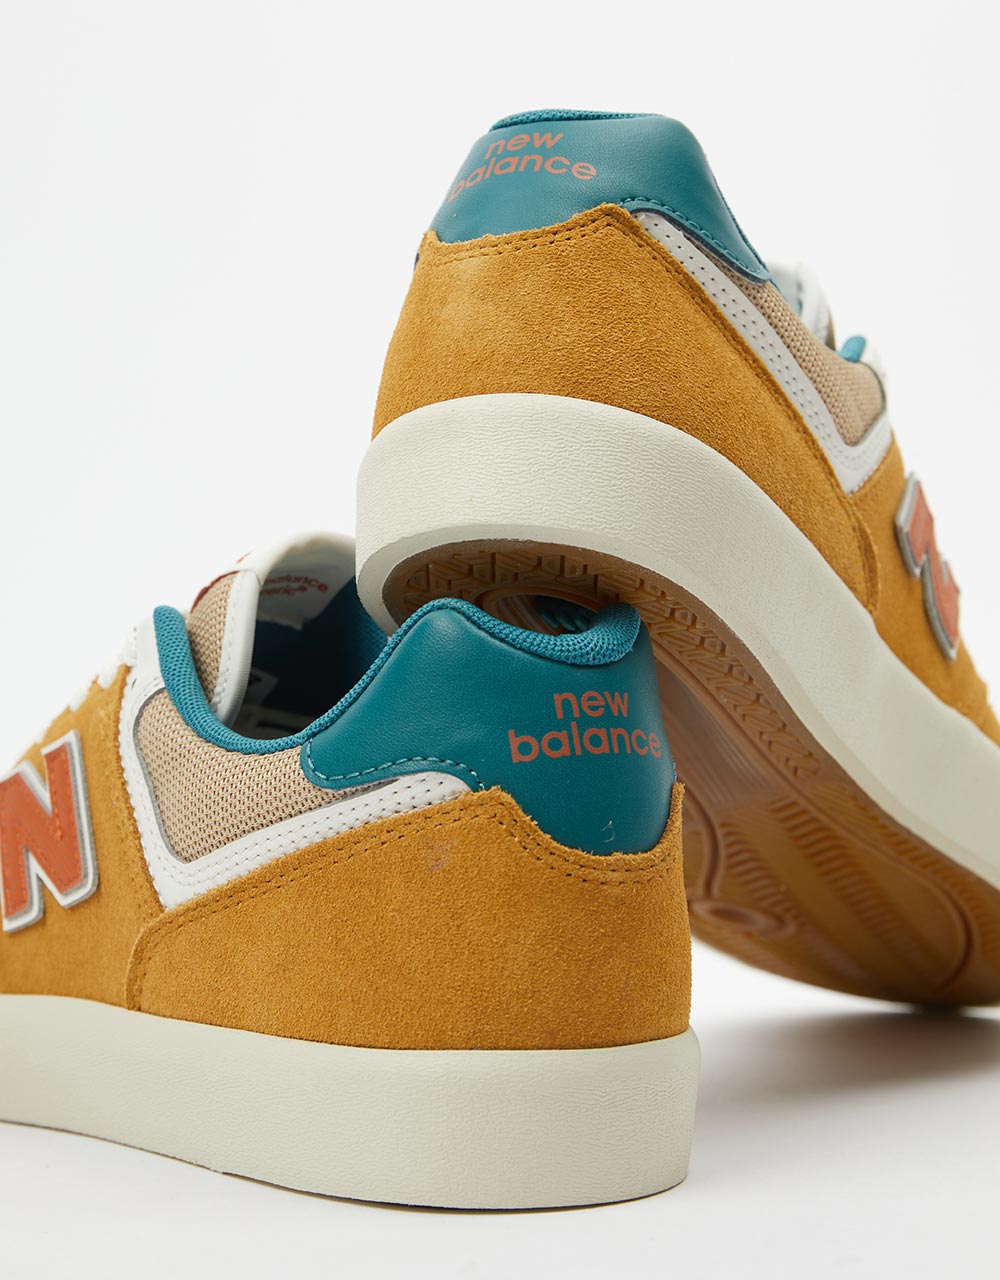 New Balance Numeric 574 Skate Shoes - Wheat/Vintage Teal